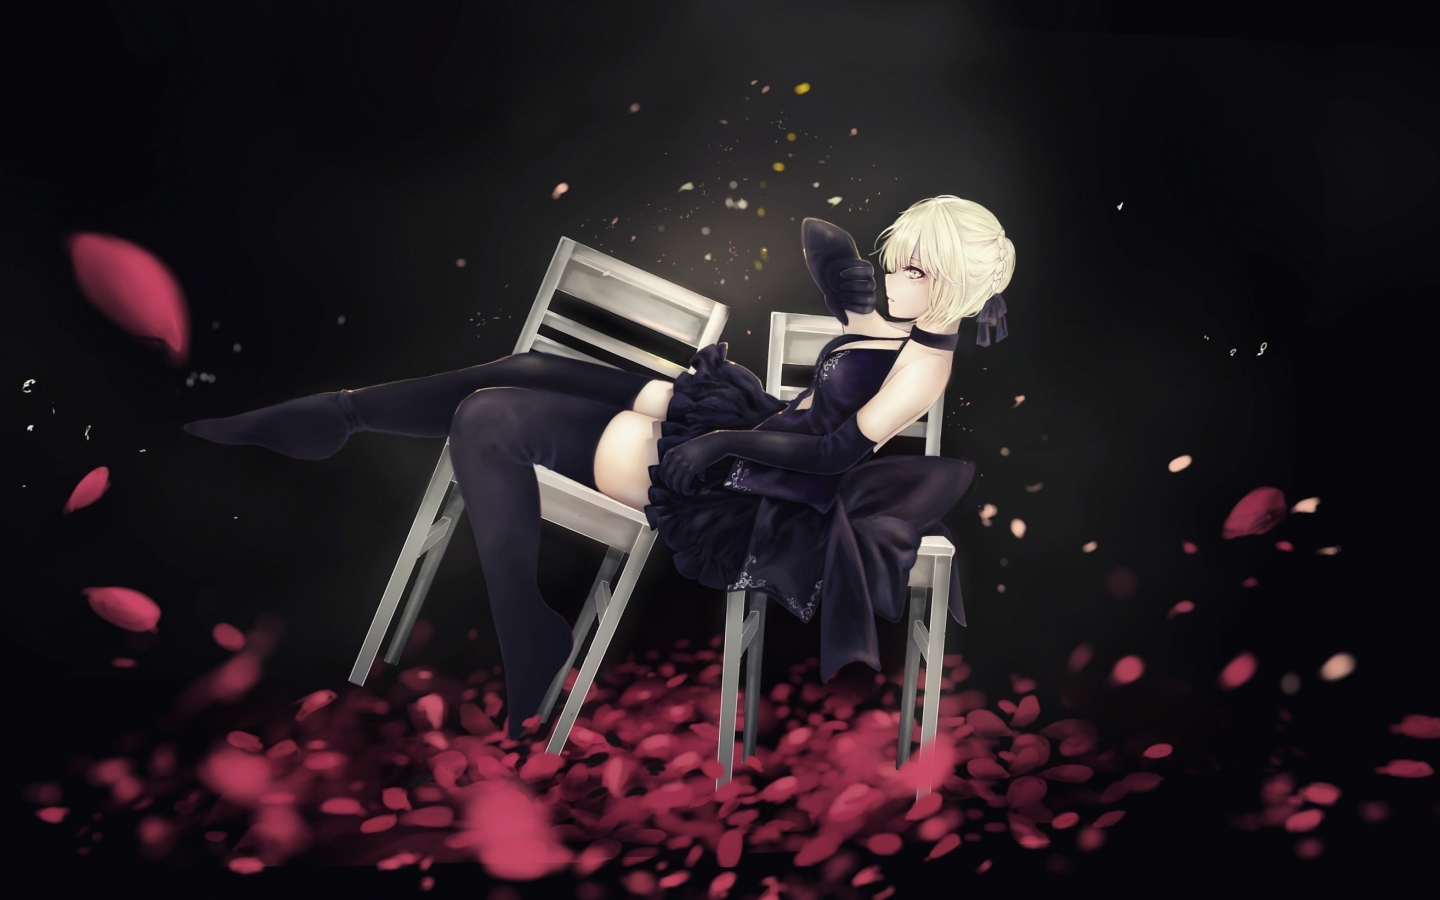 Fate stay night Saber Alter Saber wallpaper  1476x1473  807807   WallpaperUP